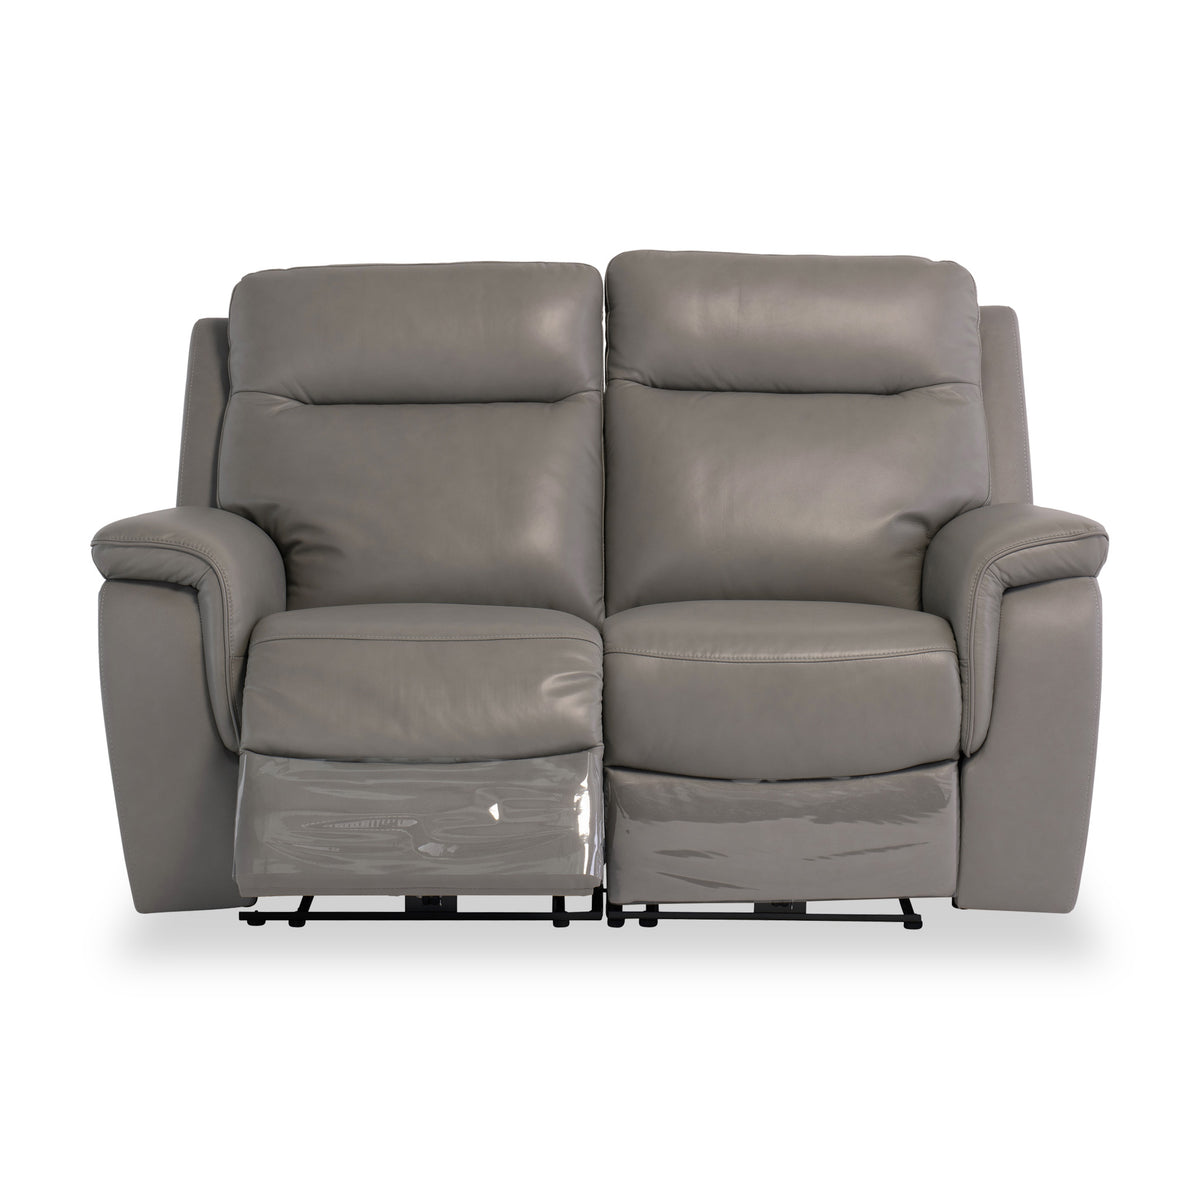 Walter Grey Leather Electric Reclining 2 Seater Sofa from Roseland Furniture